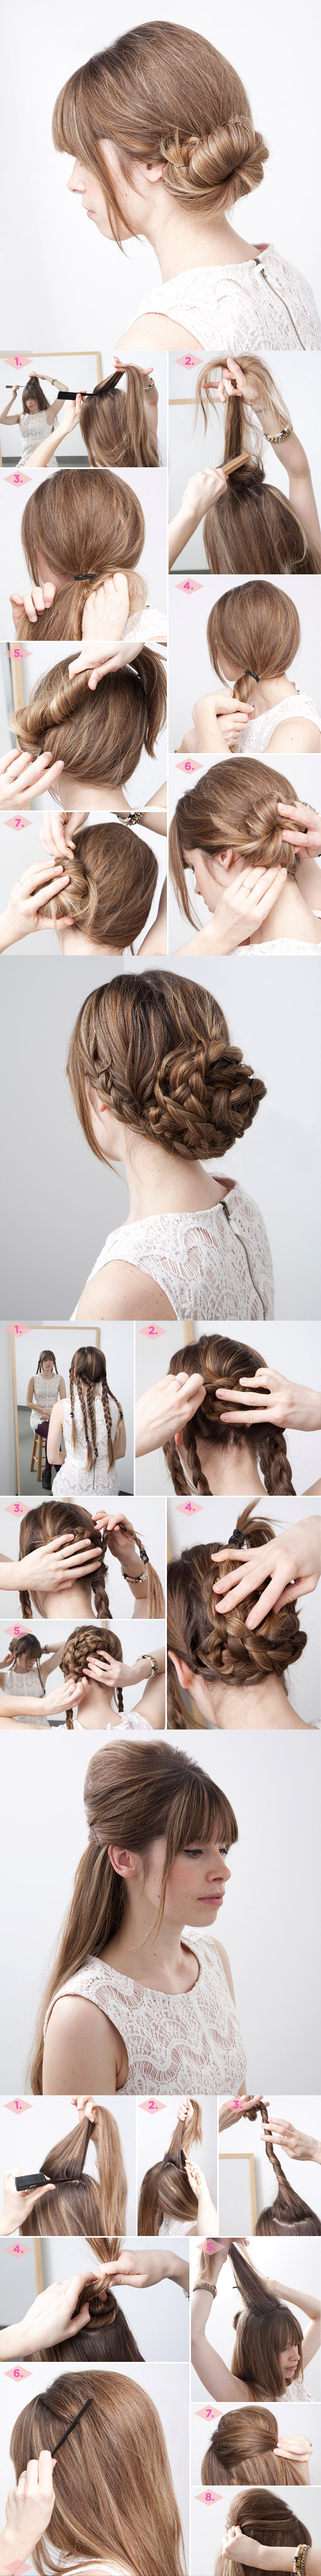 Wedding Hairstyles for Every Bride